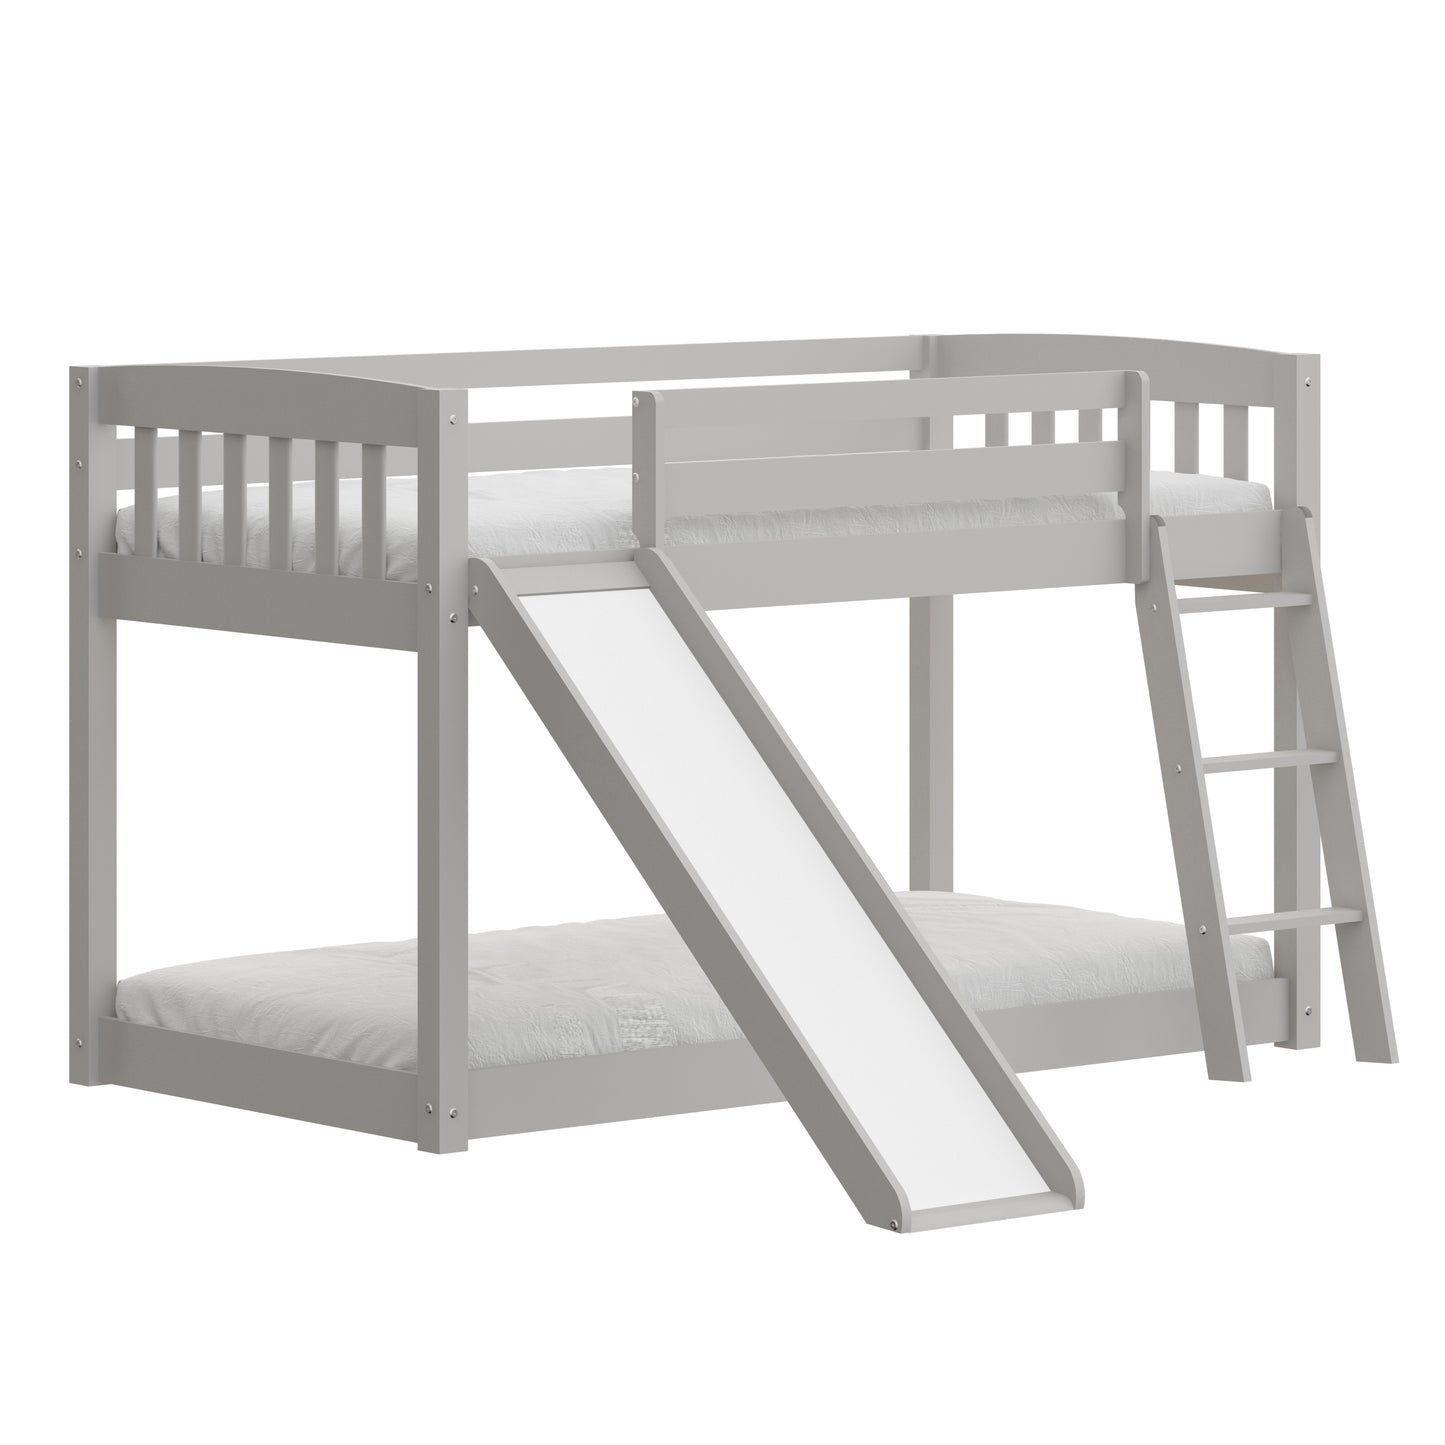 Yes4wood Kids Bunk Bed Twin Over Twin with Slide & Ladder, Heavy Duty Solid Wood Twin Bunk Beds Frame with Safety Guardrails for Toddlers, Gray